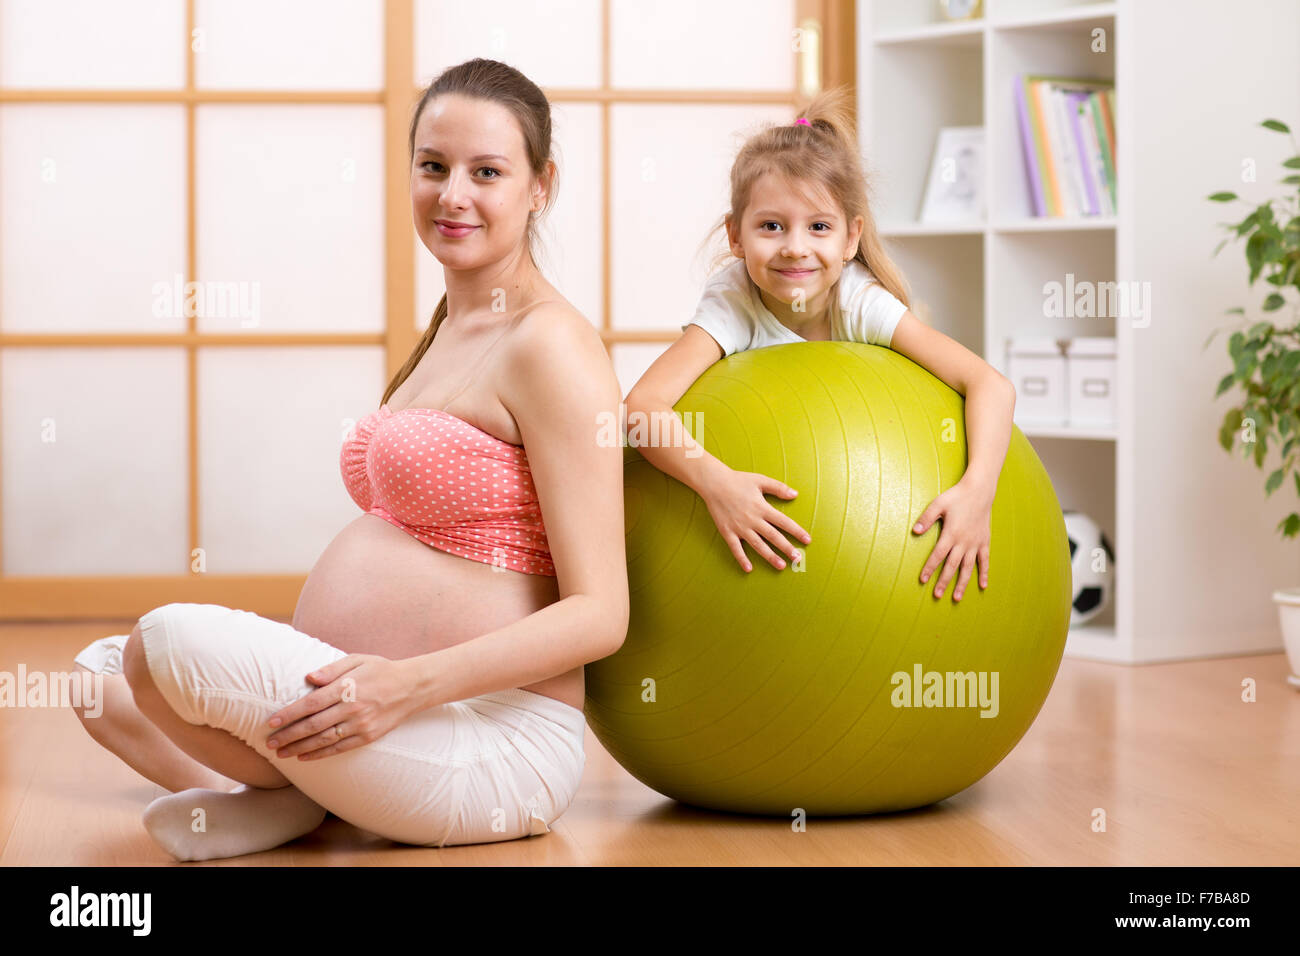 Family, children, pregnancy, fitness. Healthy lifestyle concept - happy pregnant woman exercising with fitball at home. Stock Photo